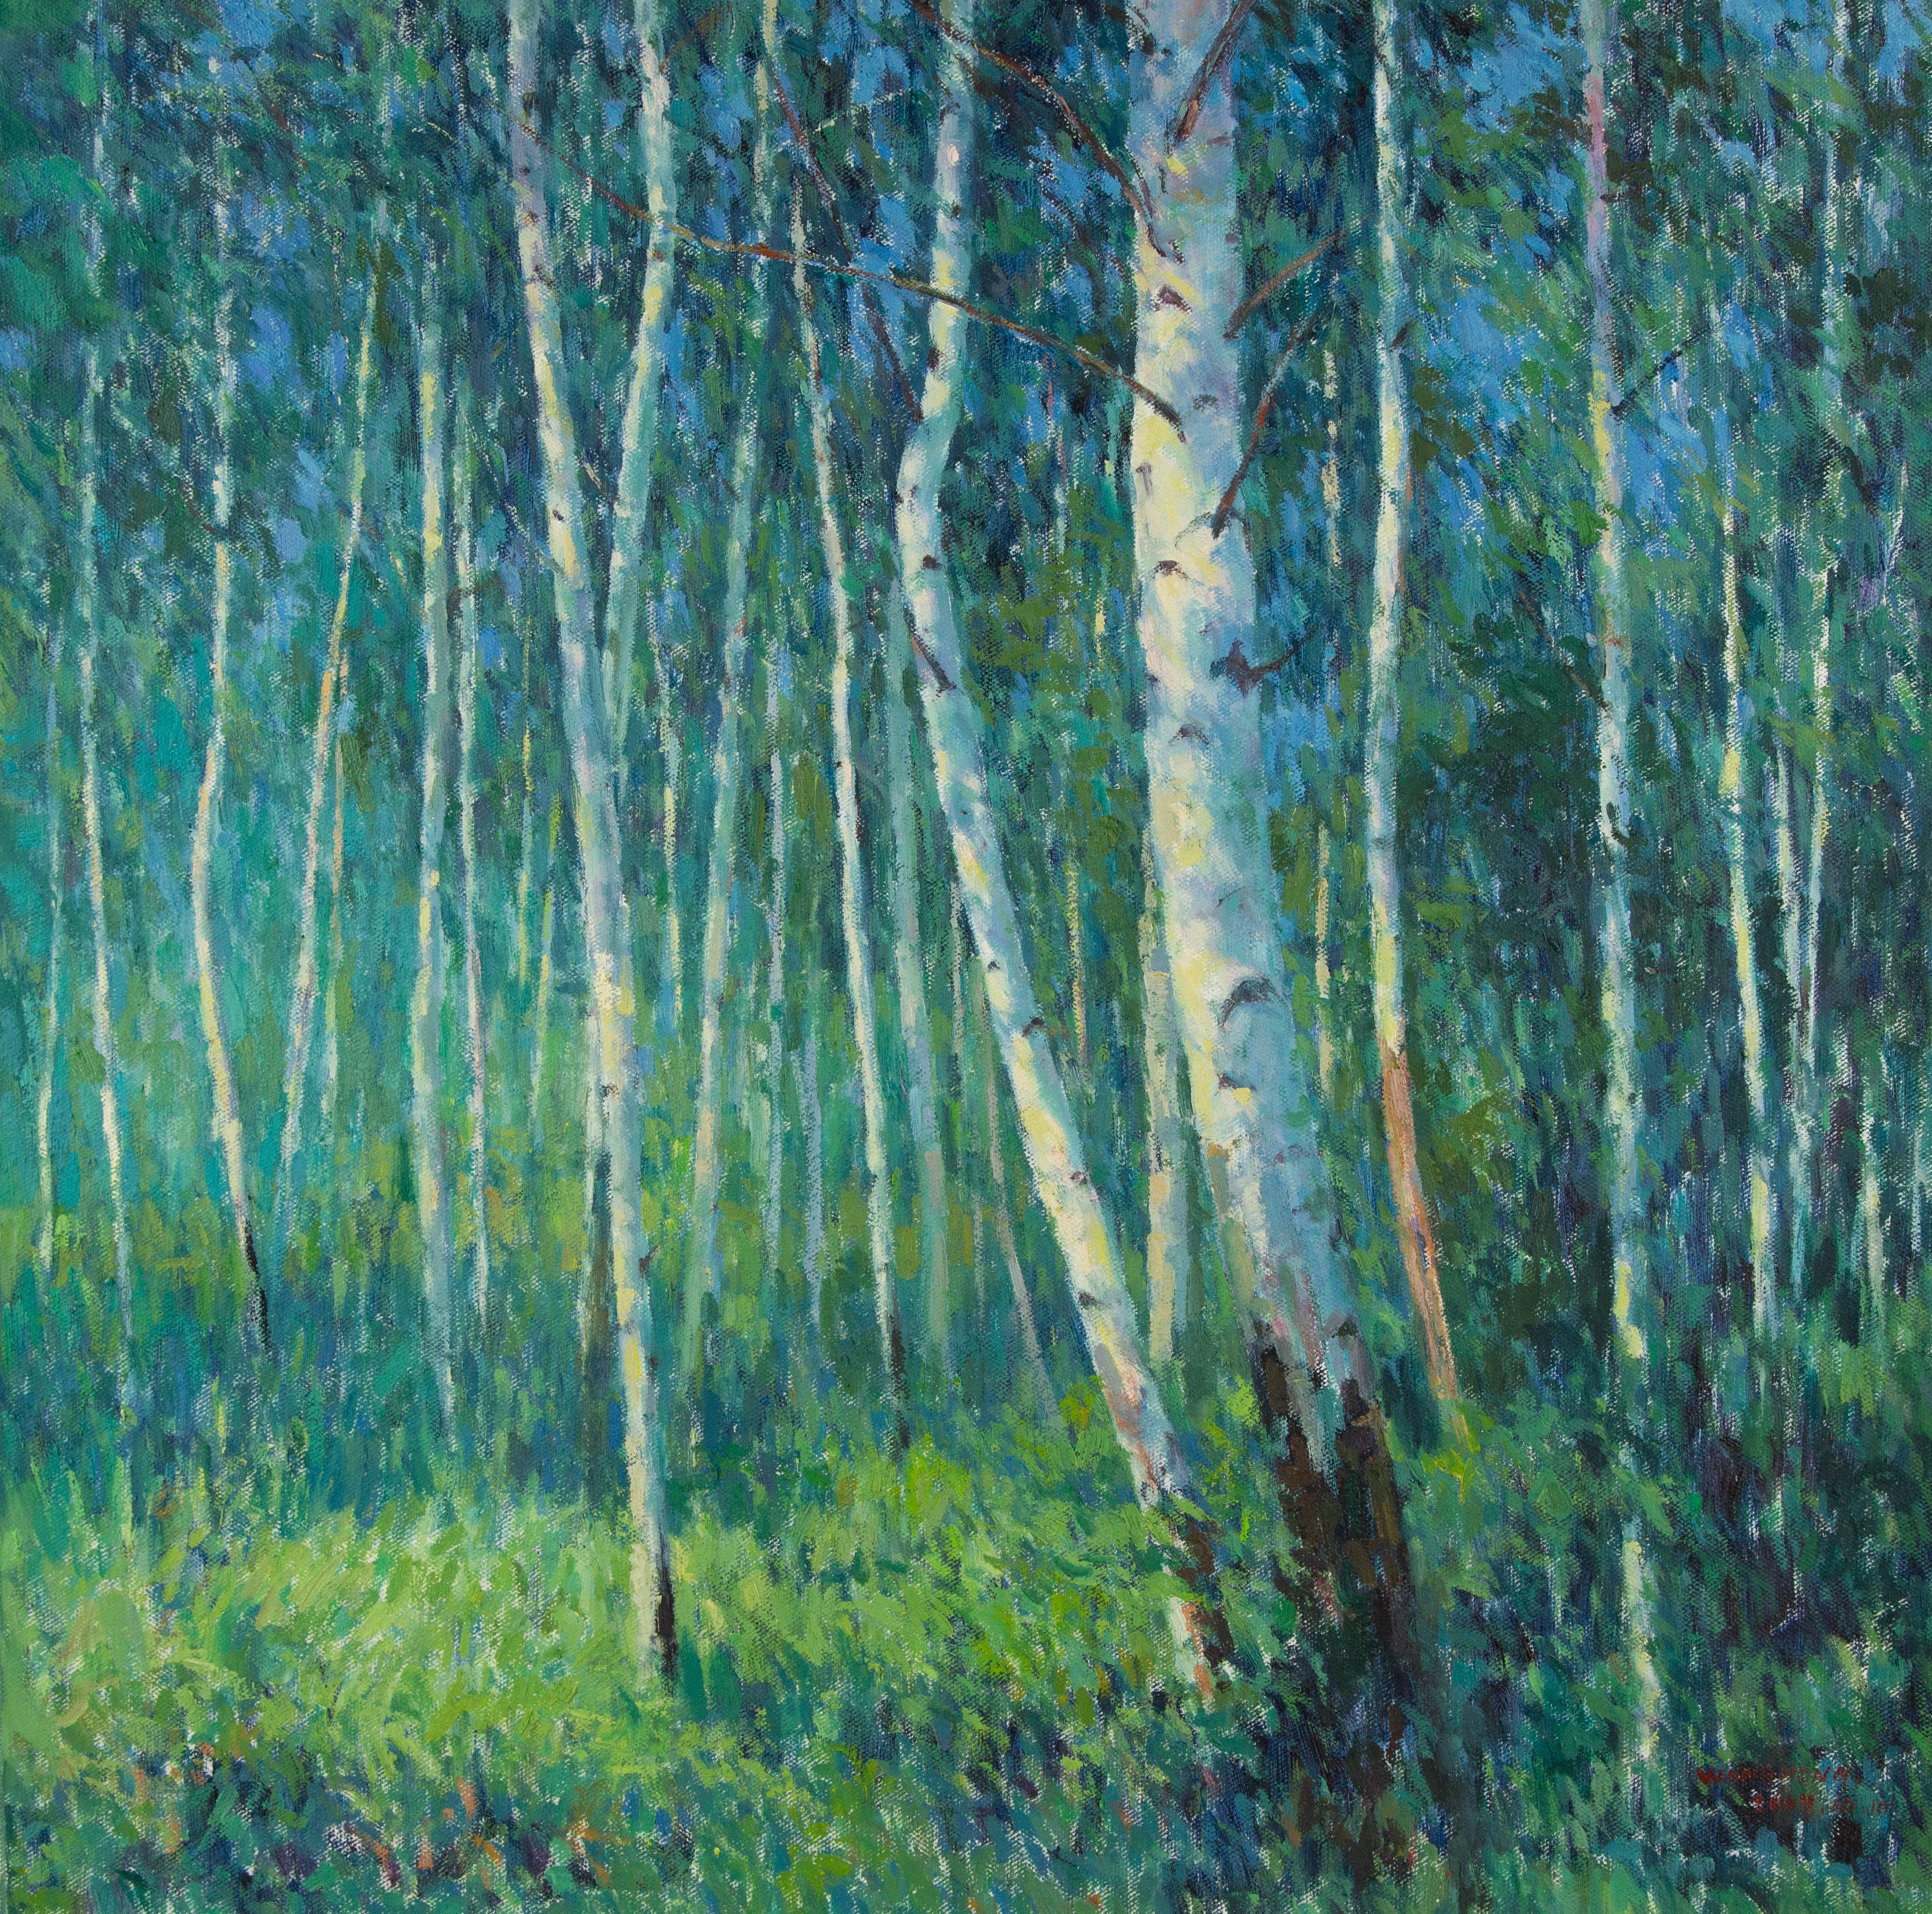  Title: Cypress Forest
 Medium: Oil on canvas
 Size: 27 x 27 inches
 Frame: Framing options available!
 Condition: The painting appears to be in excellent condition.
 Note: This painting is unstretched
 Year: 2009.10.10
 Artist: Hong Wang
